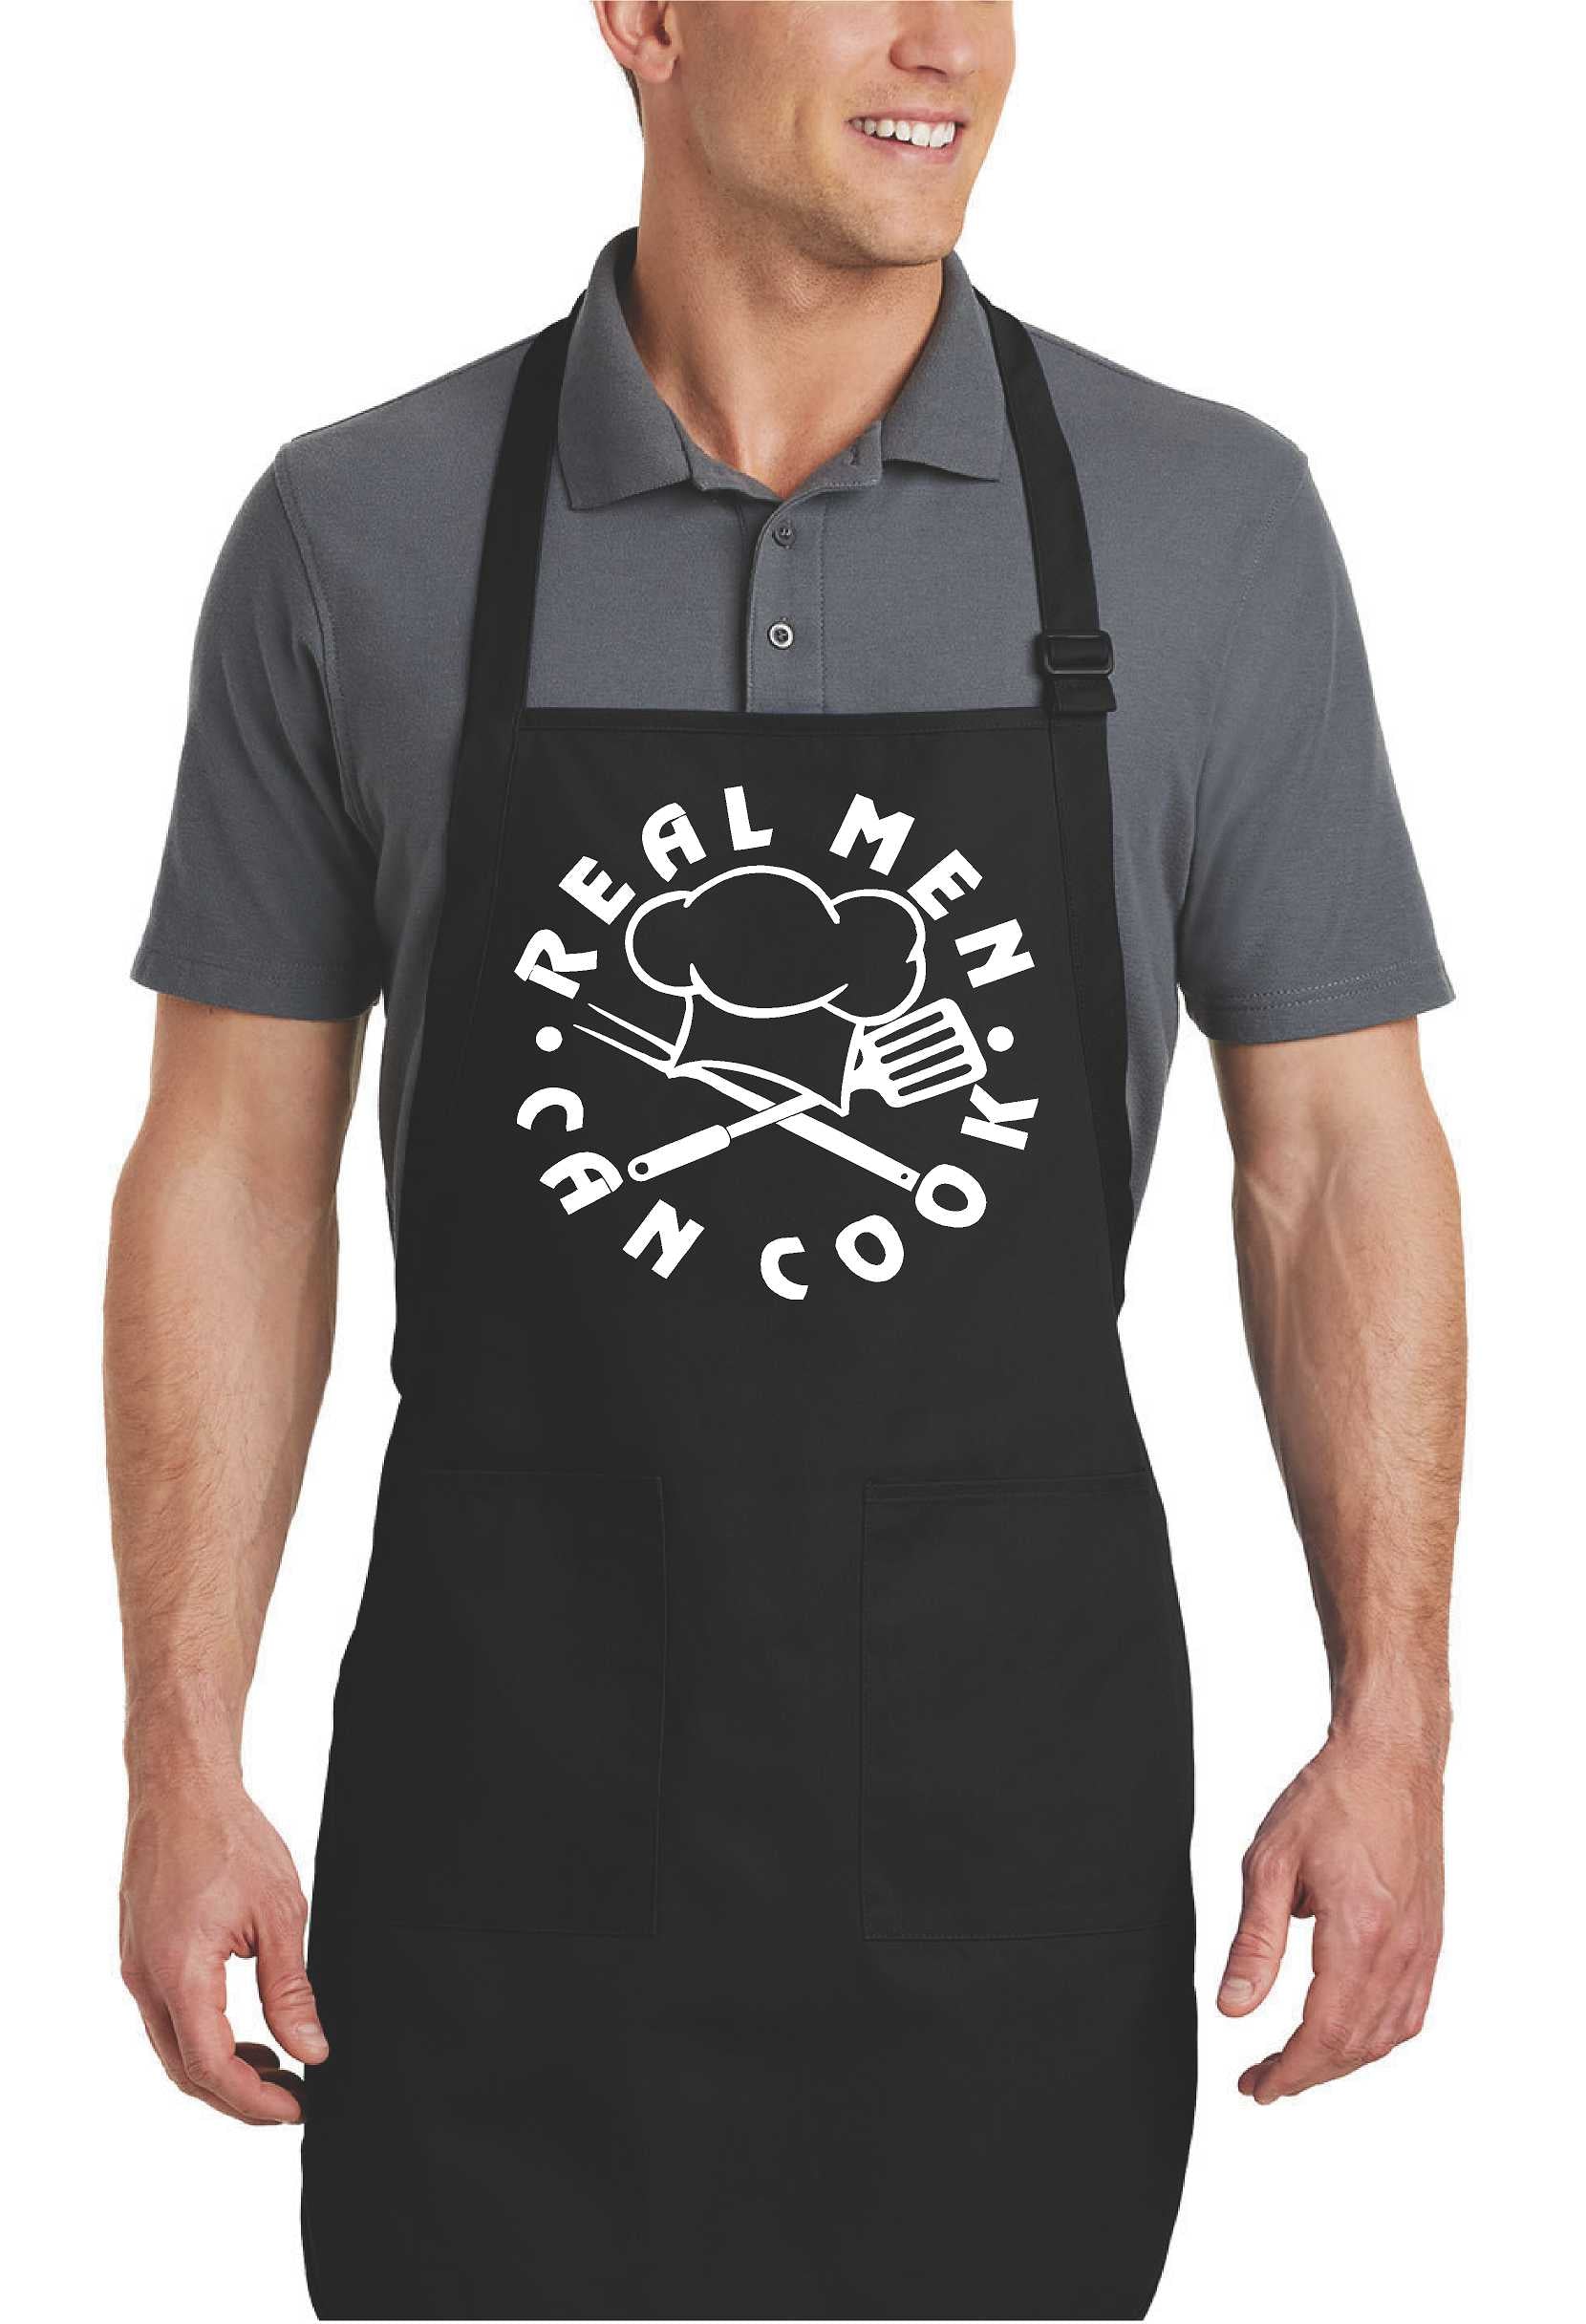 Real Men Cook - Funny BBQ Apron for Dads